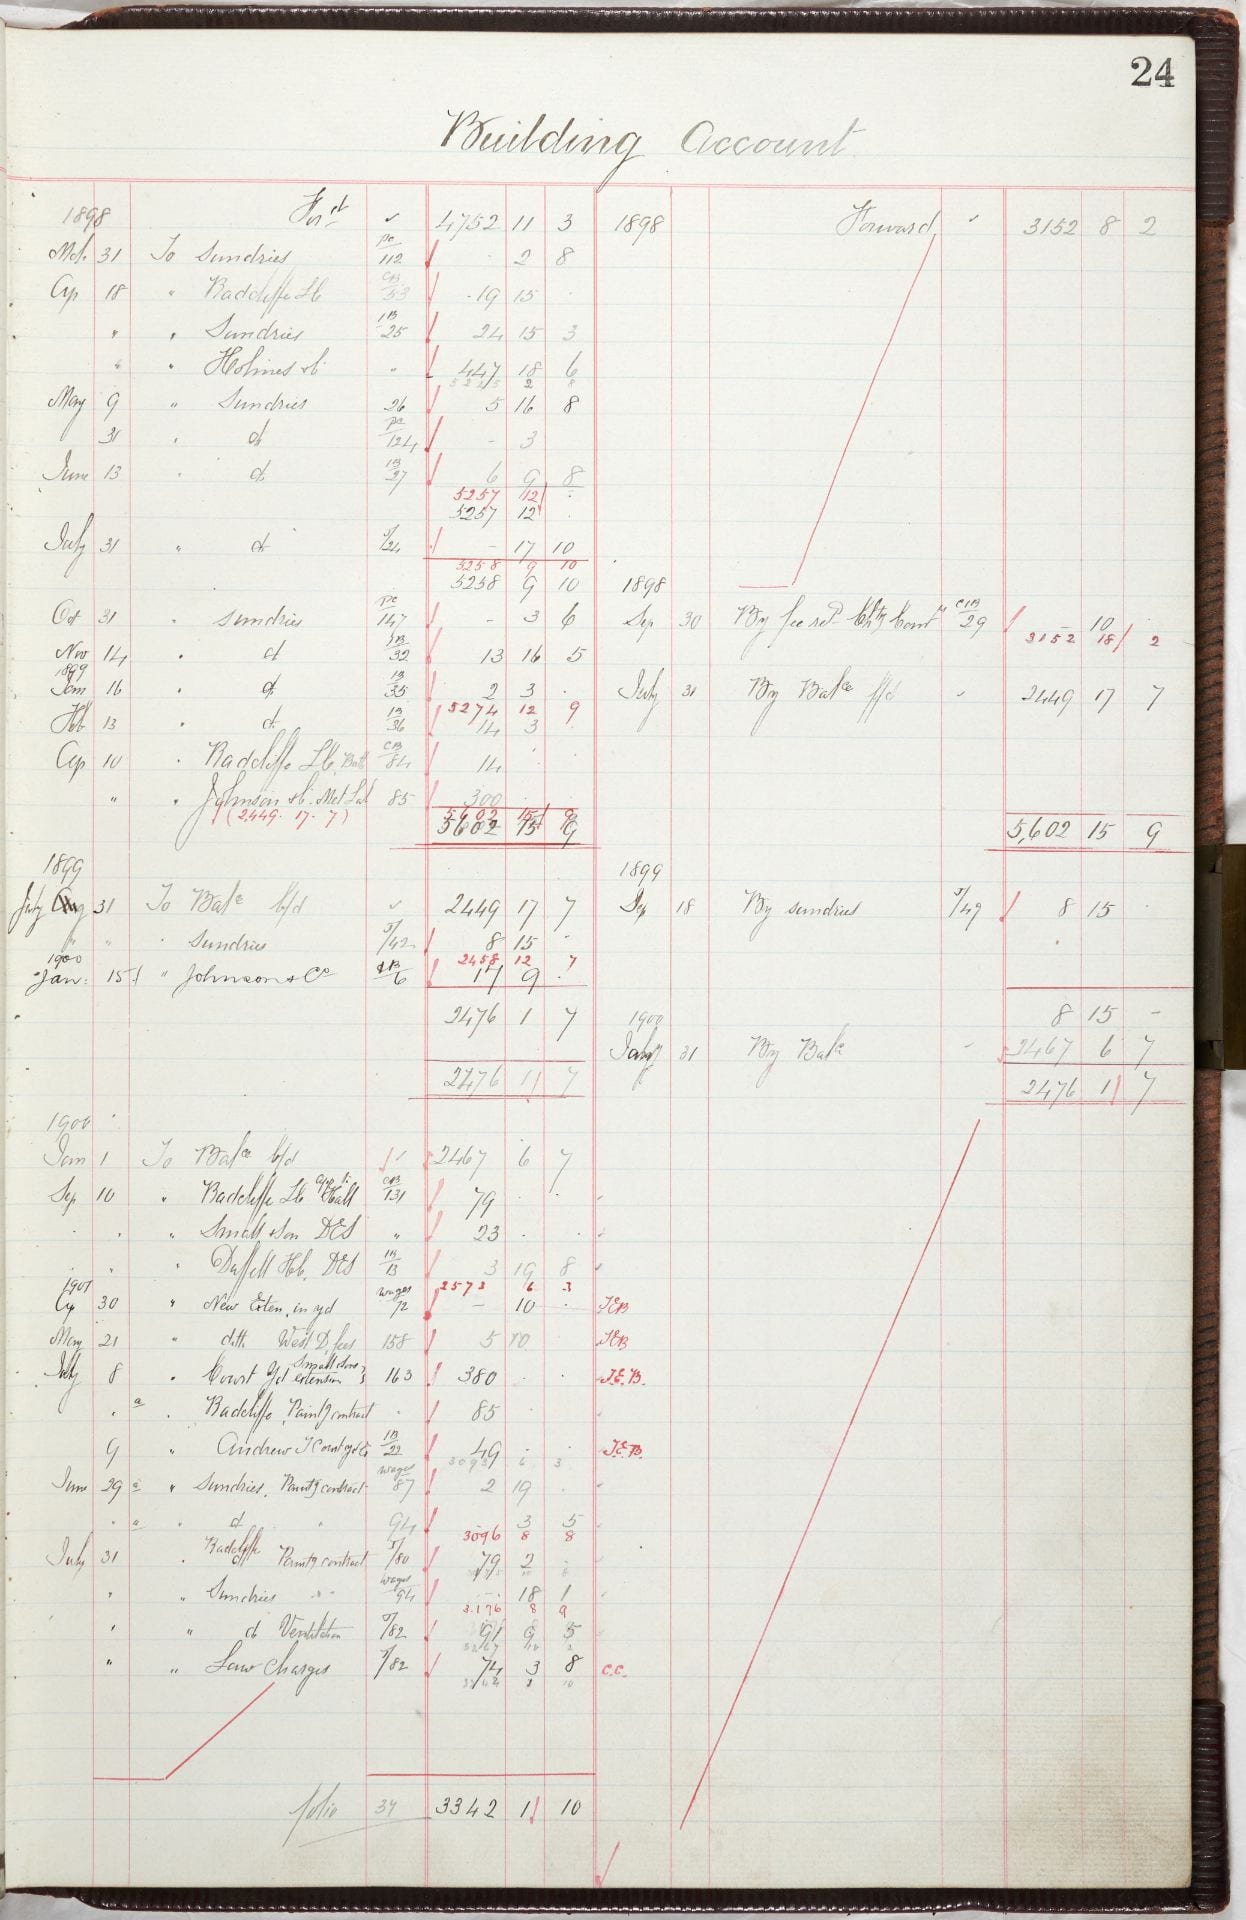 Financial ledger page 24 Building account. Costs arising from 1898.